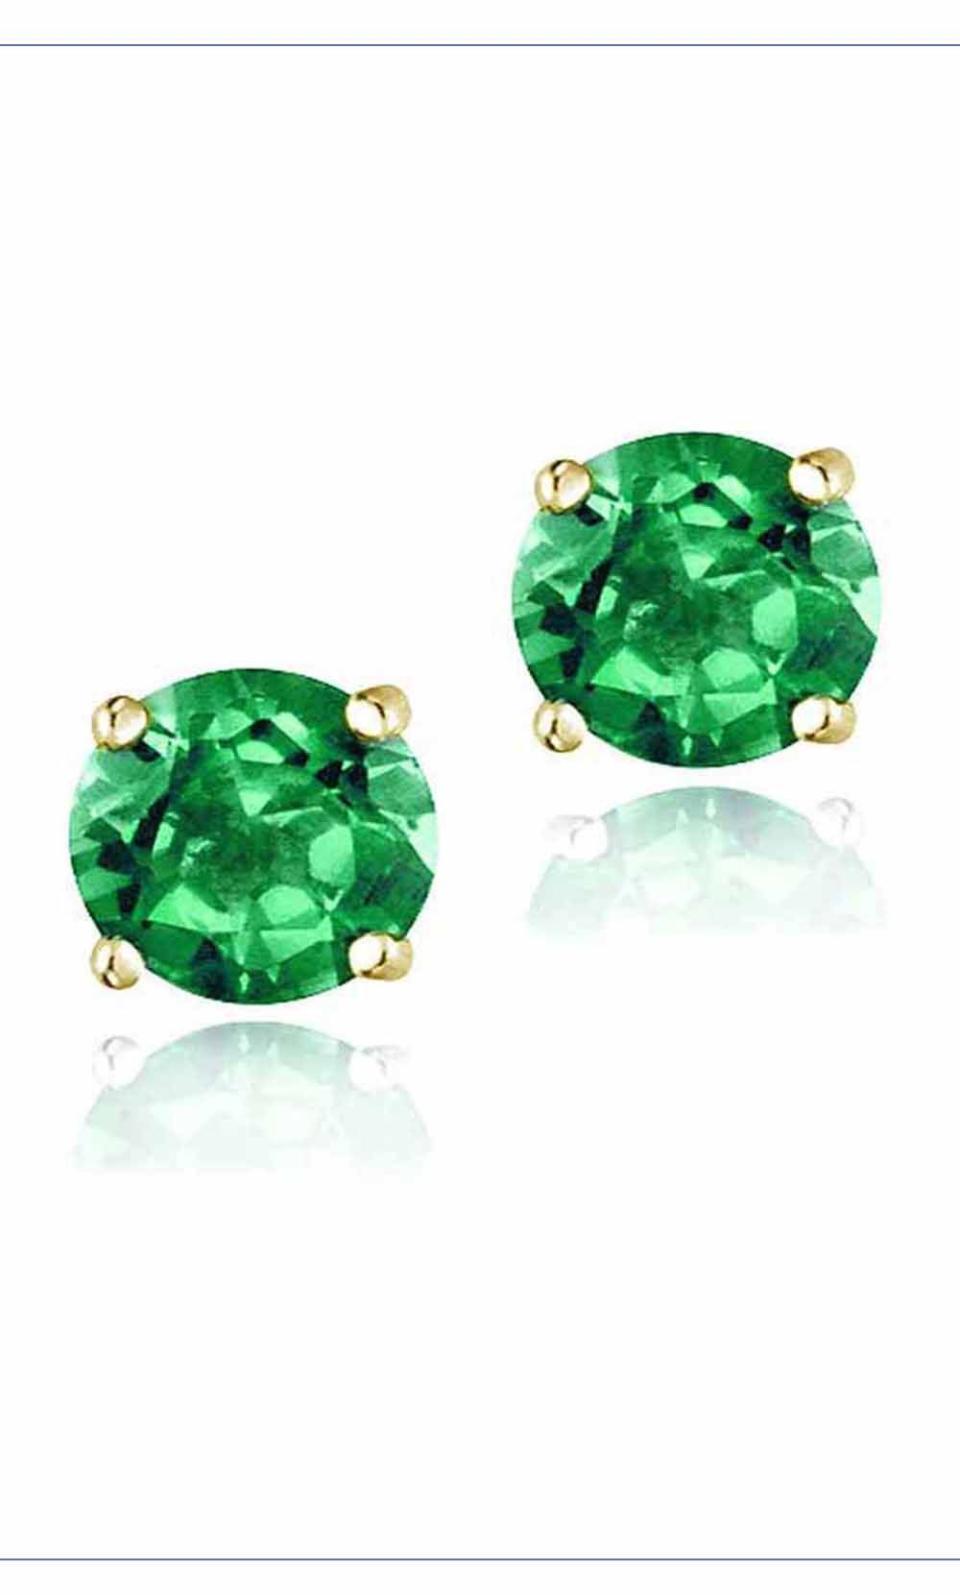 5) Top Seller - 2.1 Carat T.G.W. Created Emerald 18kt Gold over Sterling Silver Stud Earrings, 6mm